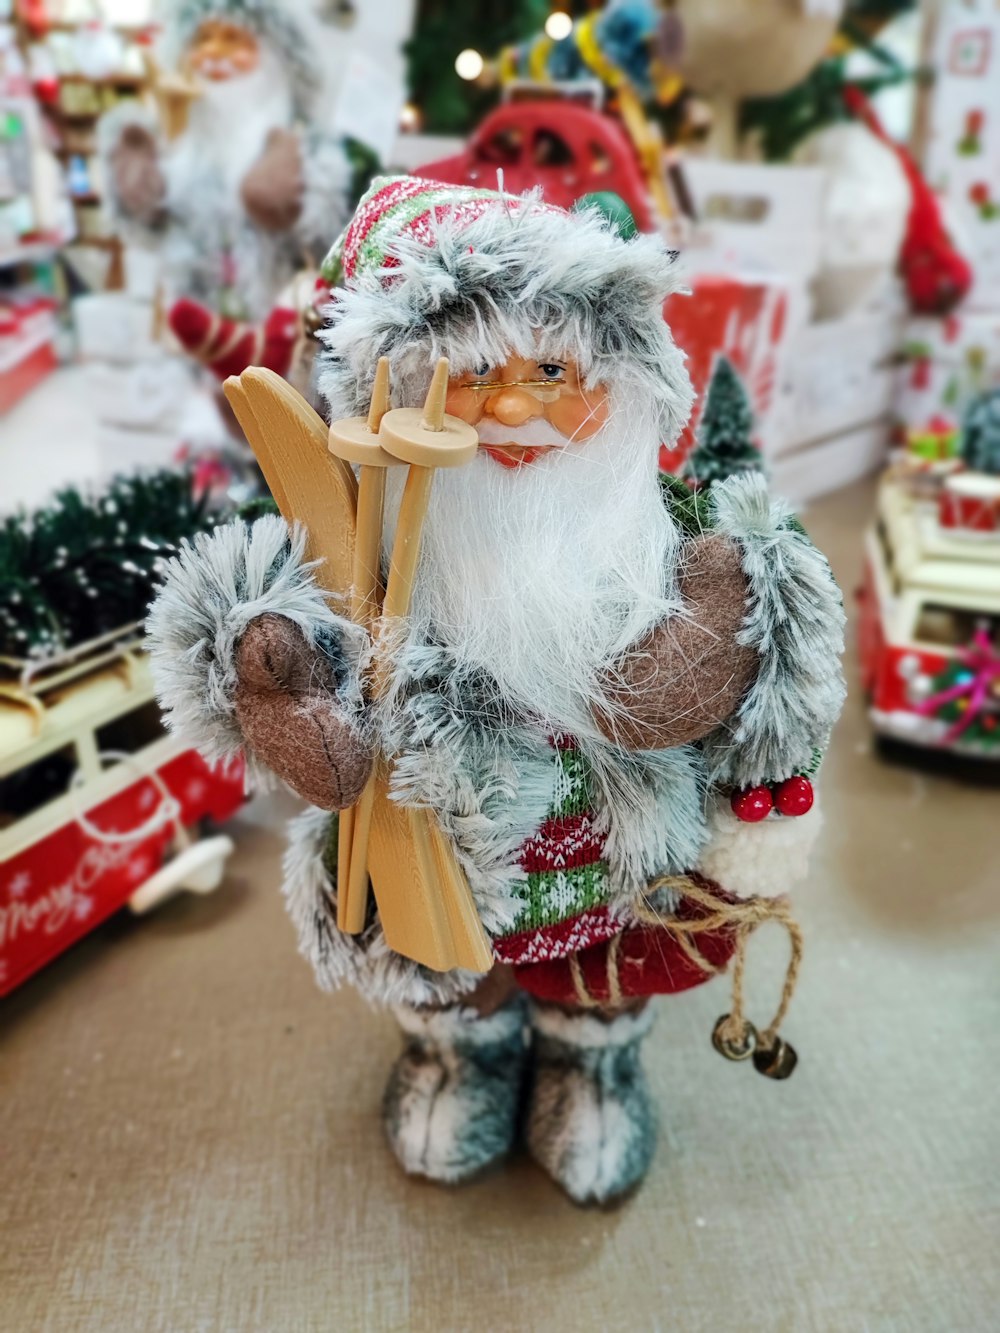 a santa clause figurine holding a wooden sled